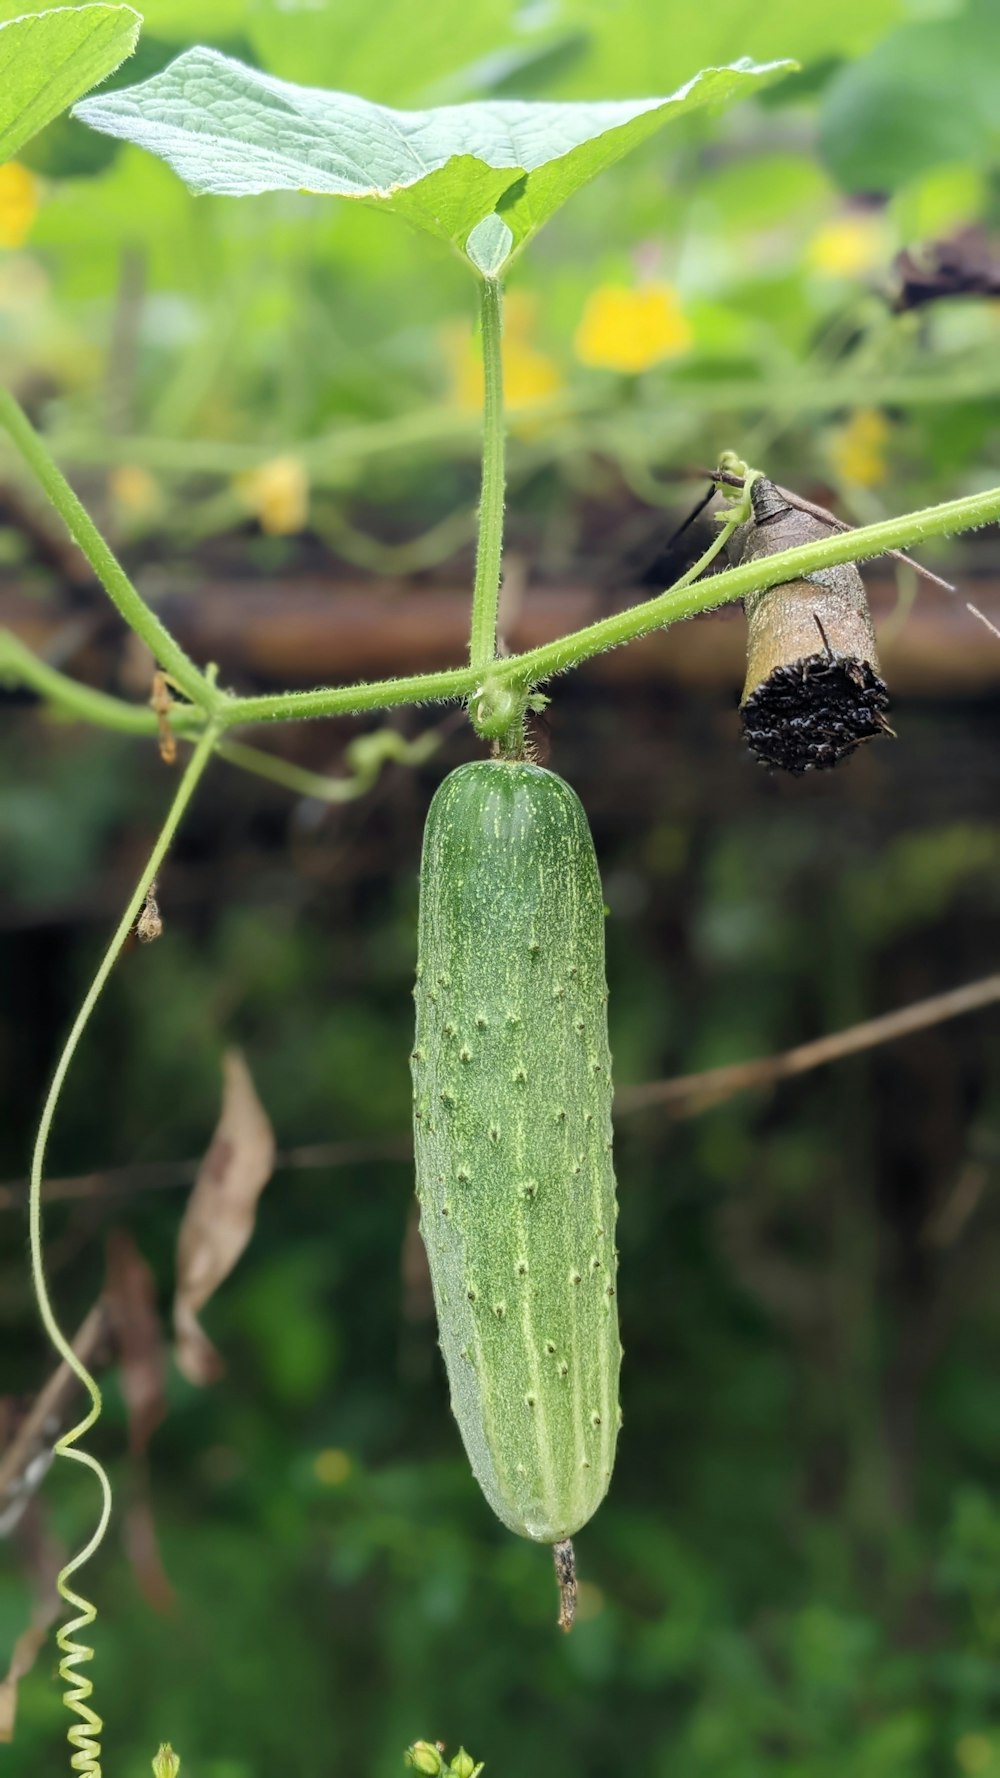 a cucumber growing on a vine in a garden